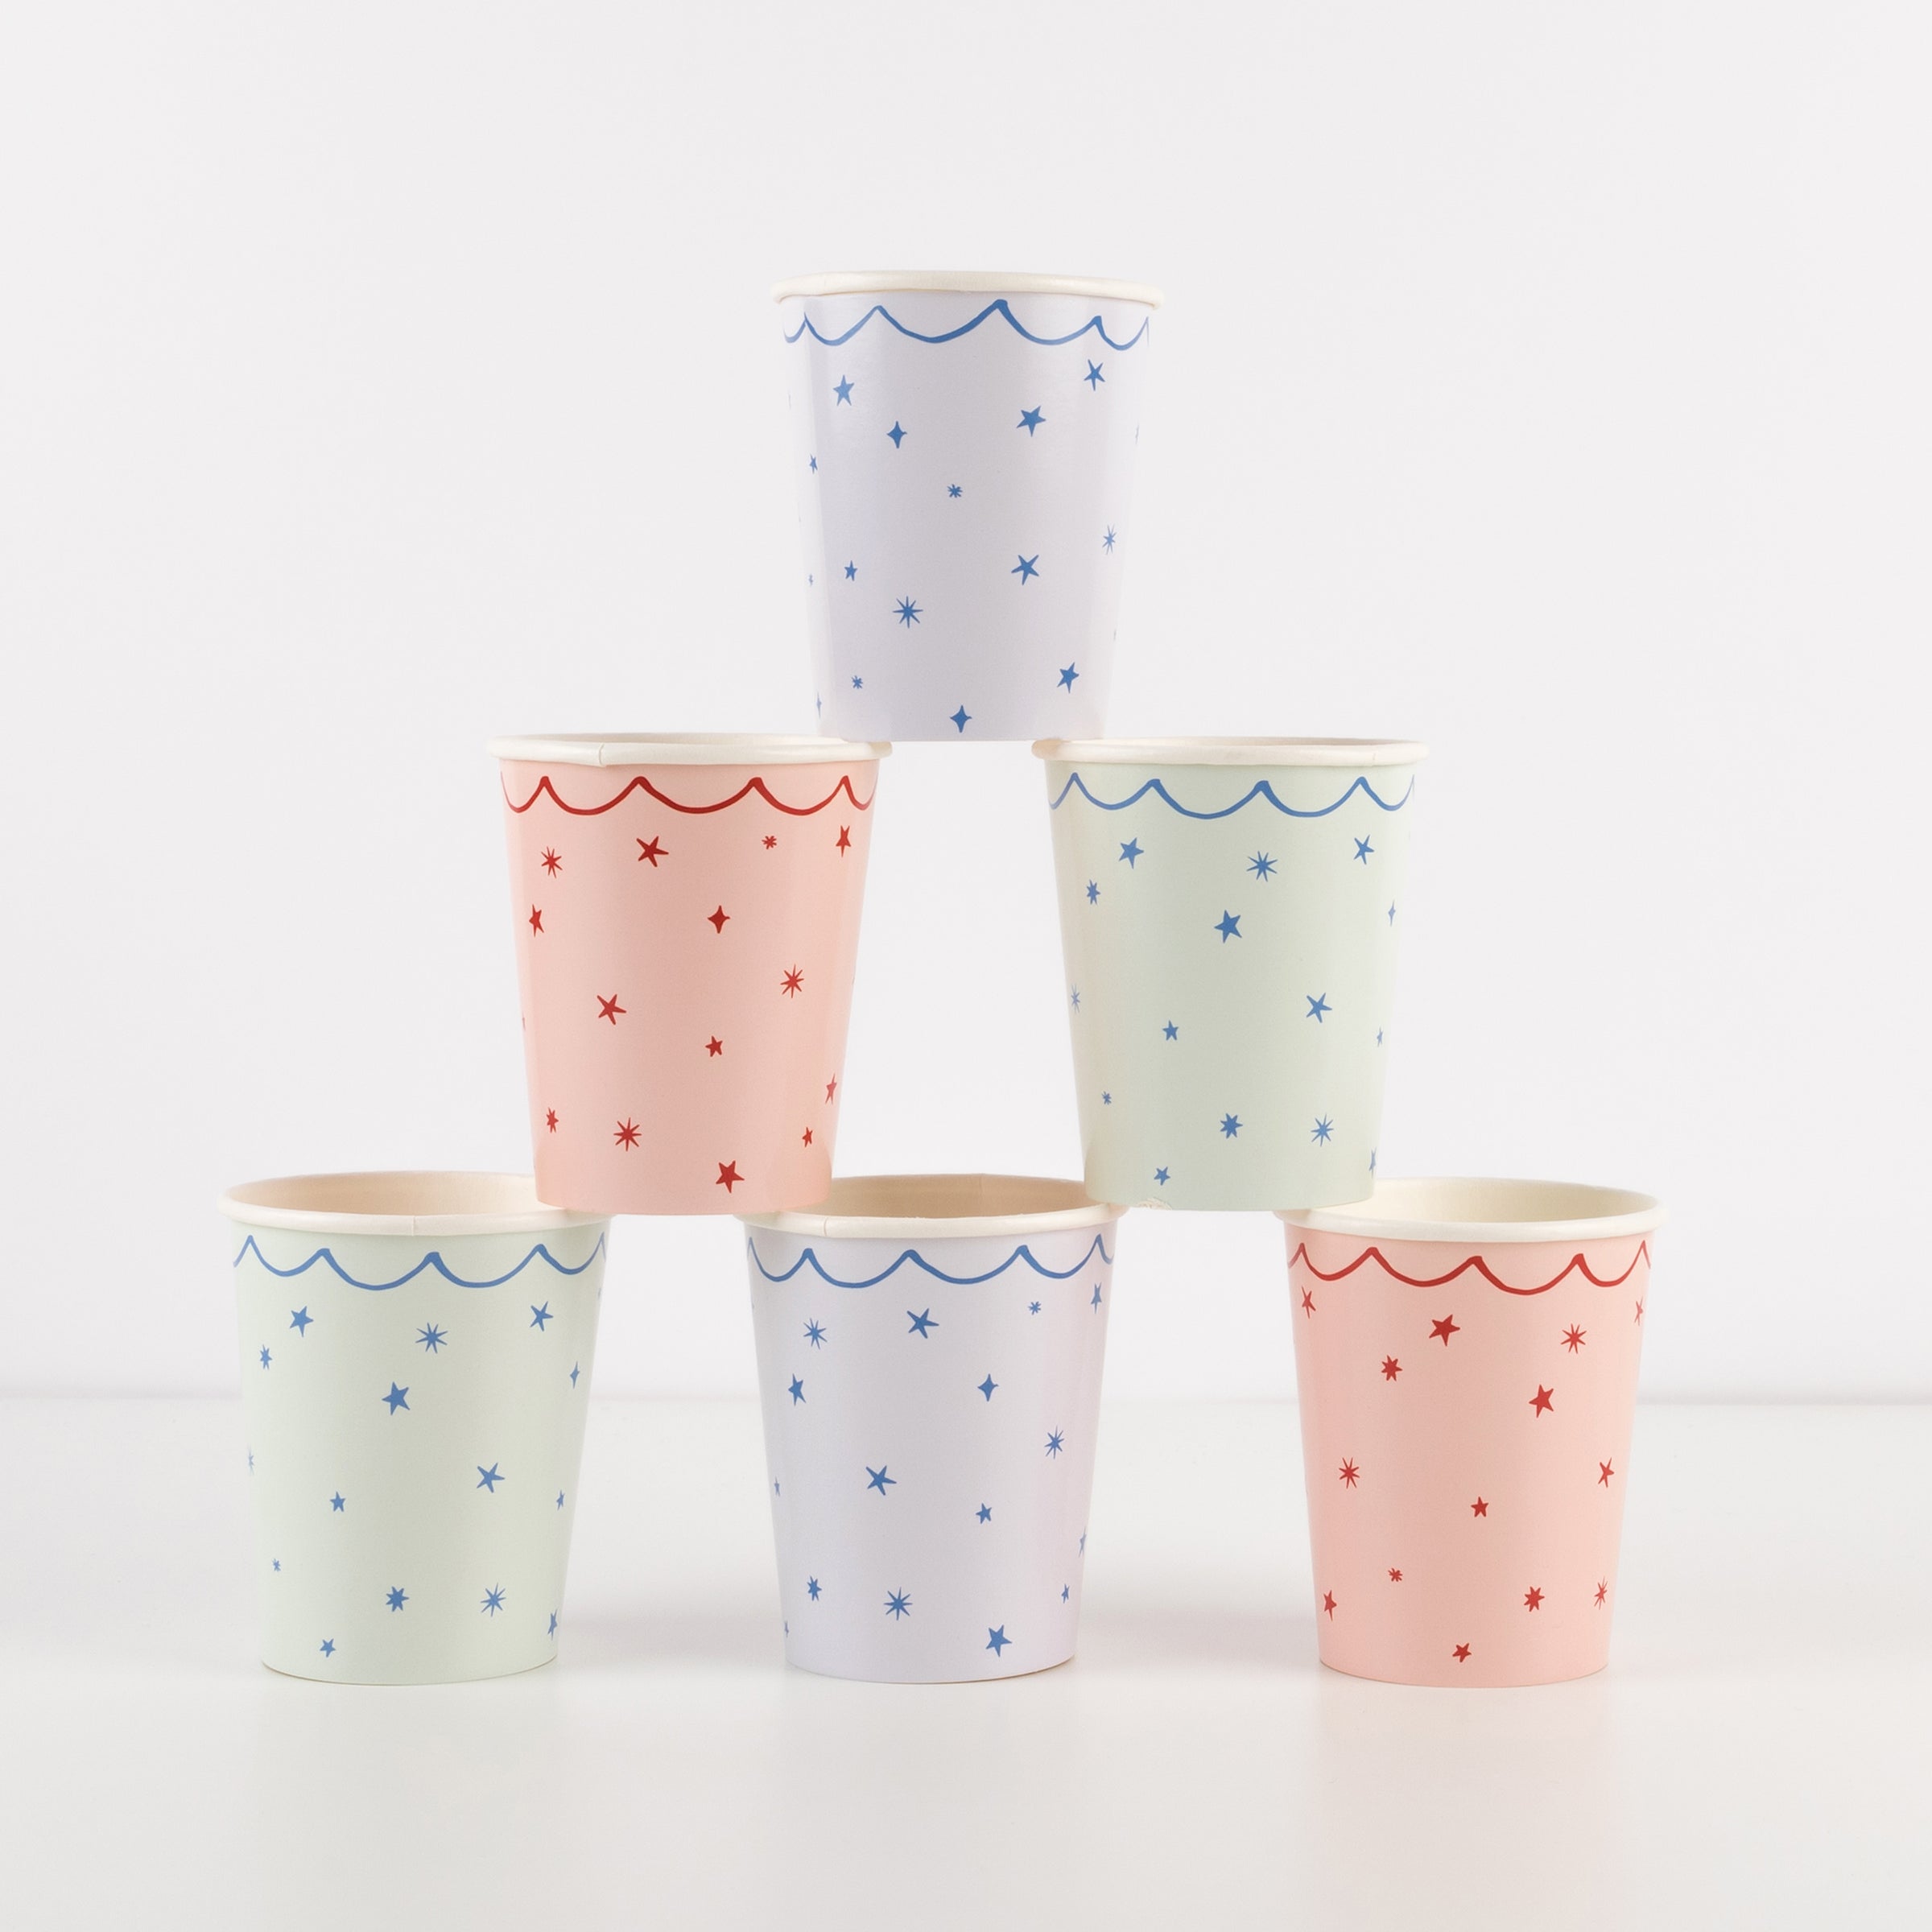 Our star party cup set features blue cups, pink cups and mint cups for the perfect paper cup selection.